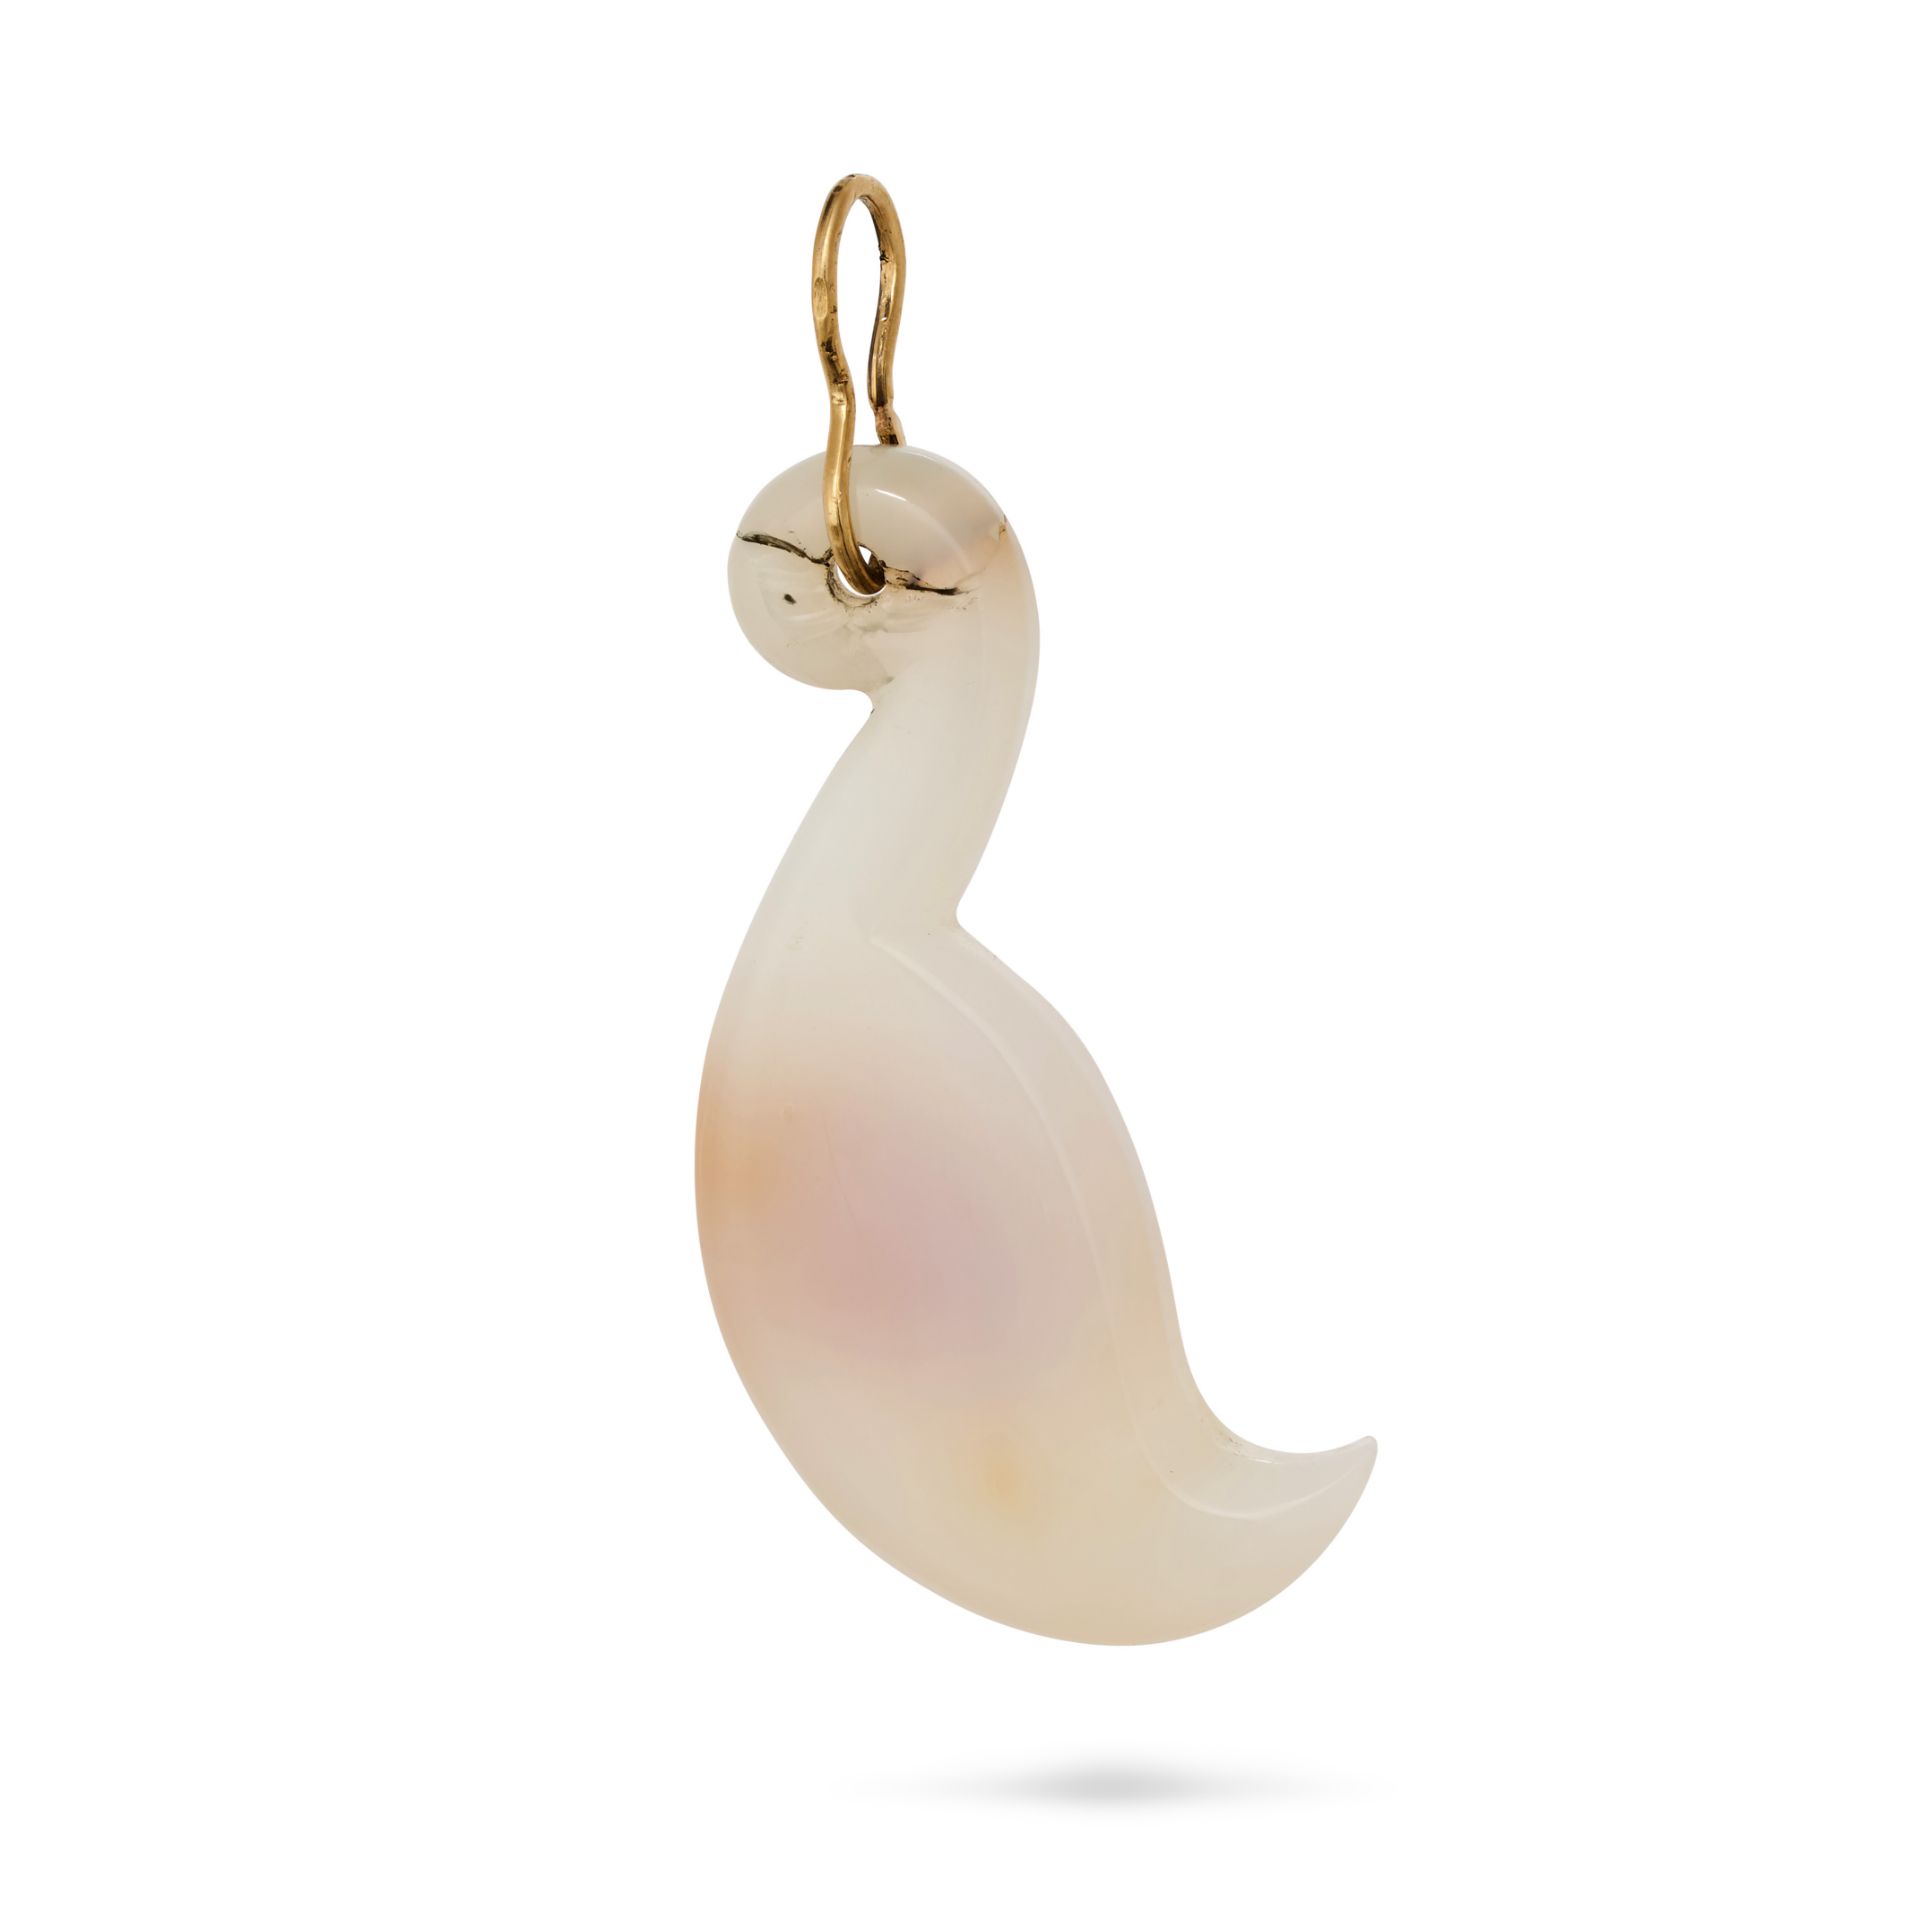 AN AGATE BIRD PENDANT the agate carved to depict a bird, no assay marks, 4.3cm, 3.3g.